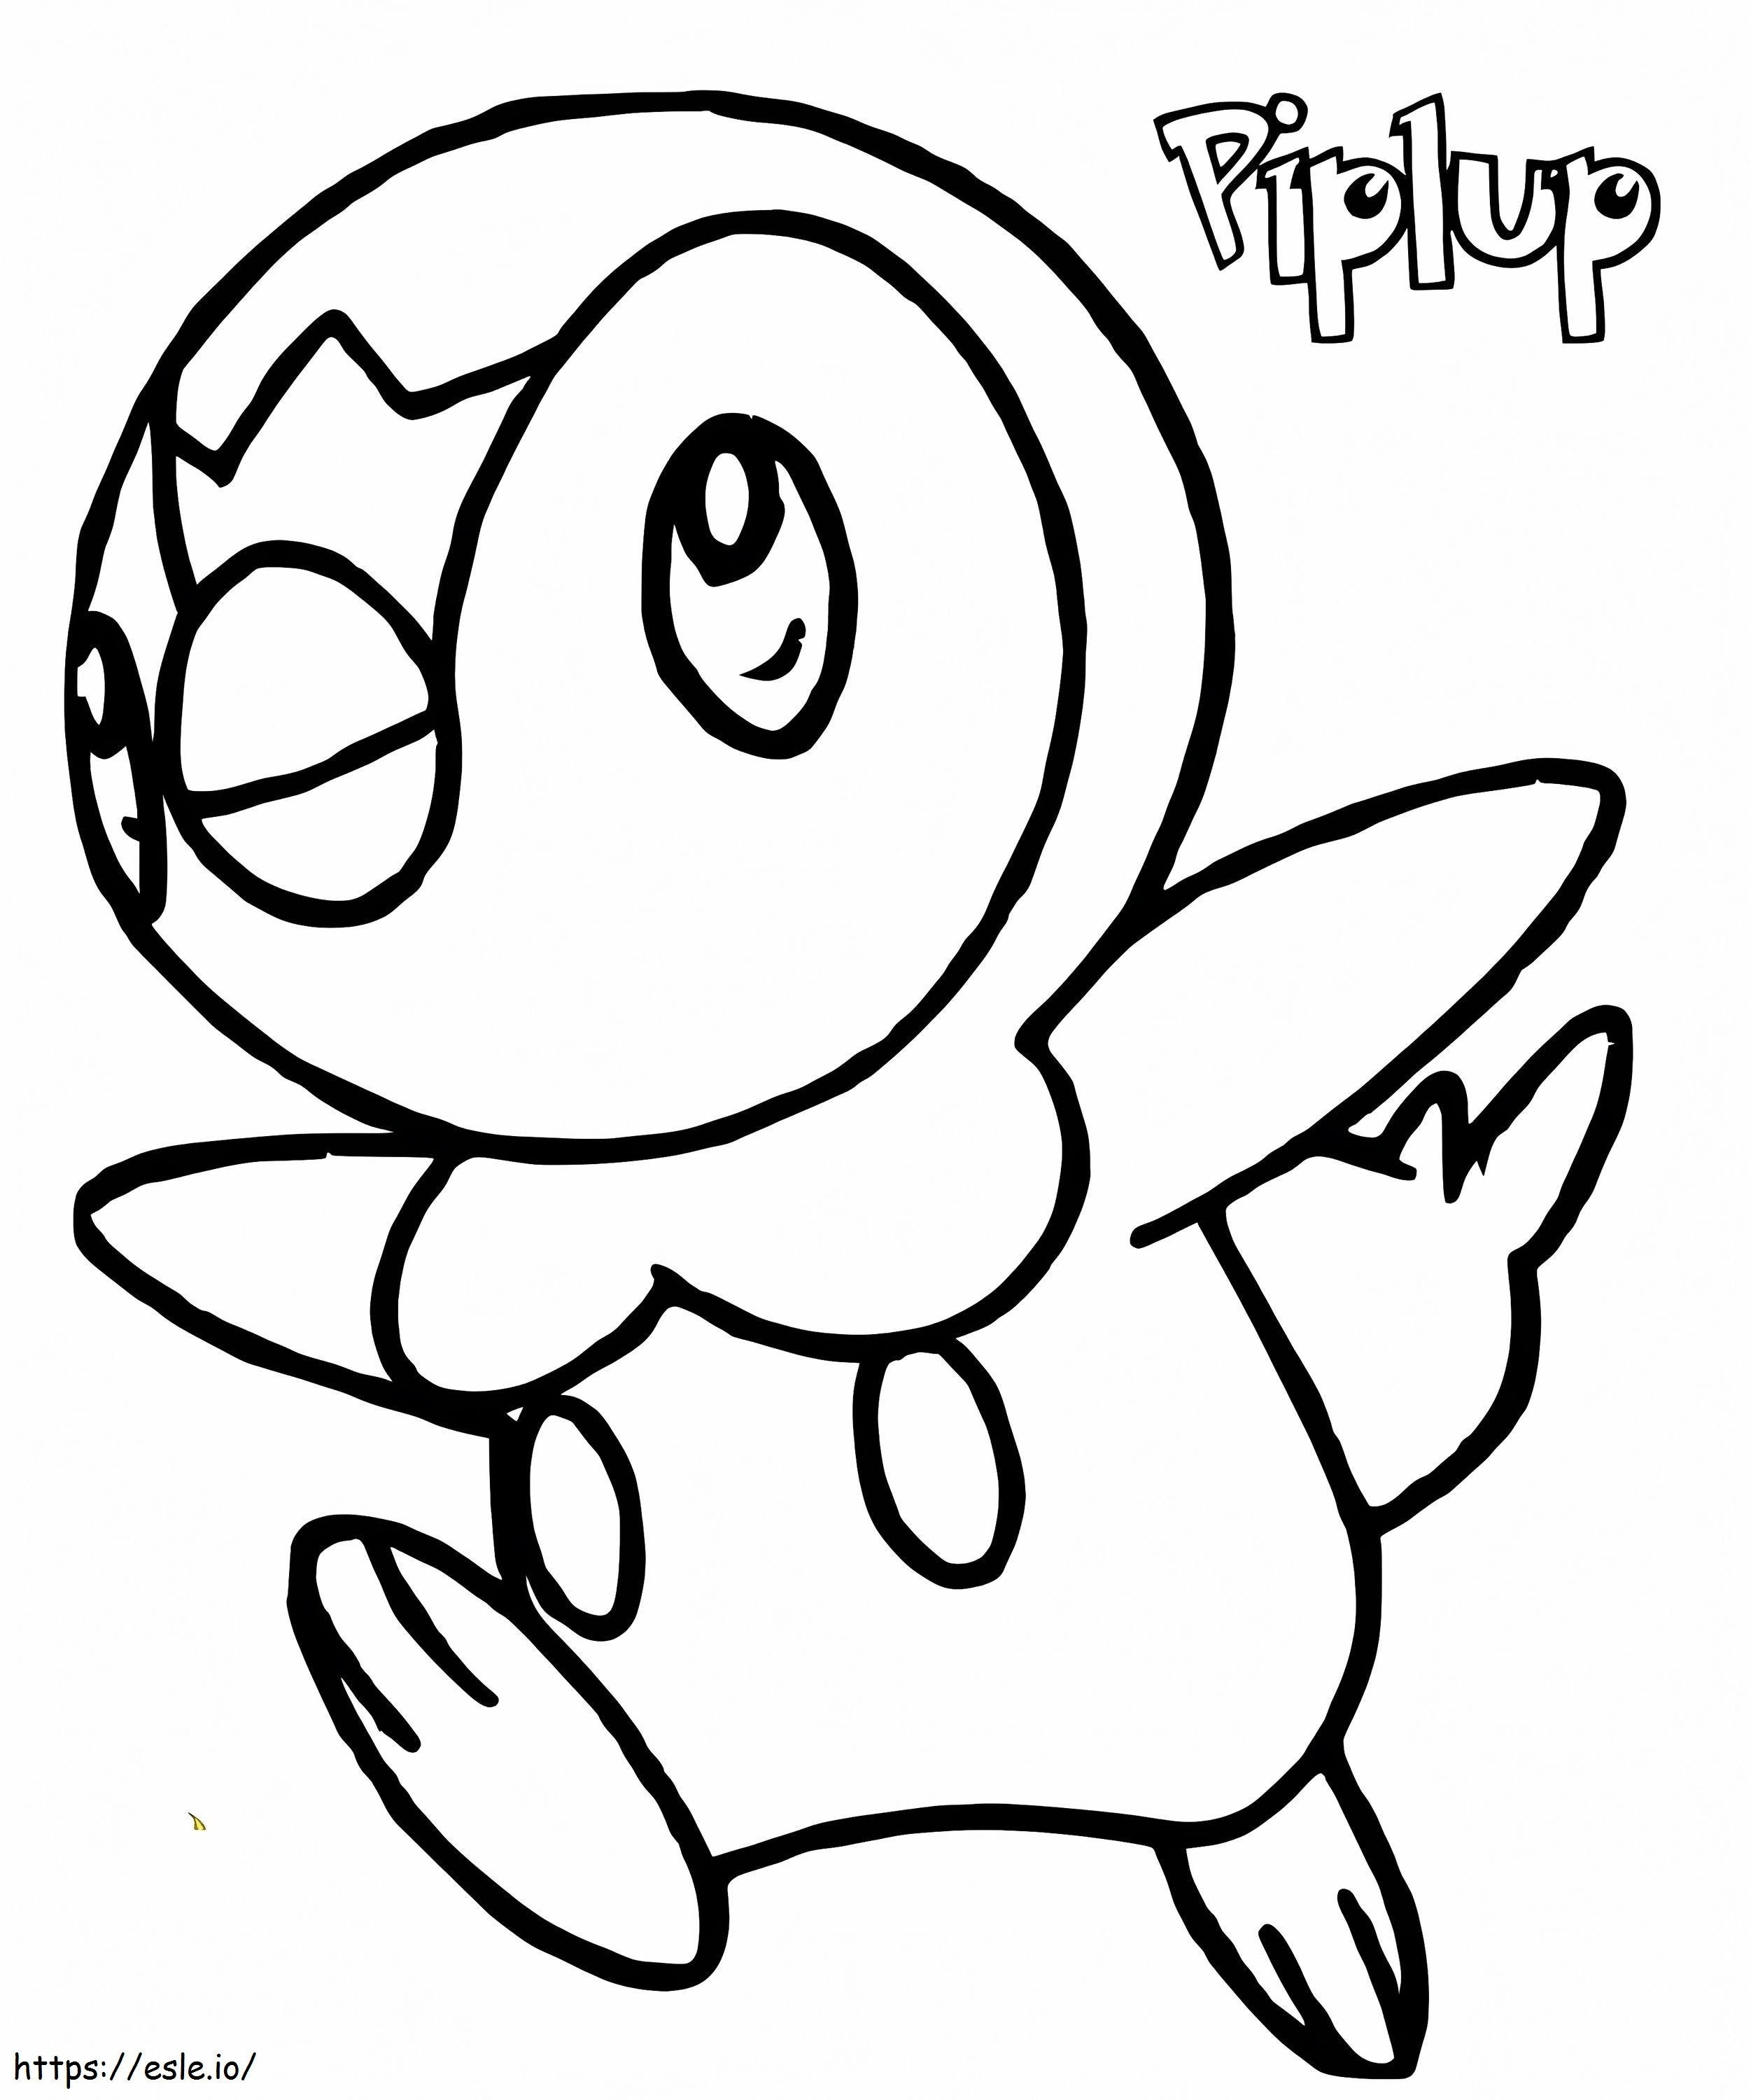 Free Piplup Pokemon coloring page